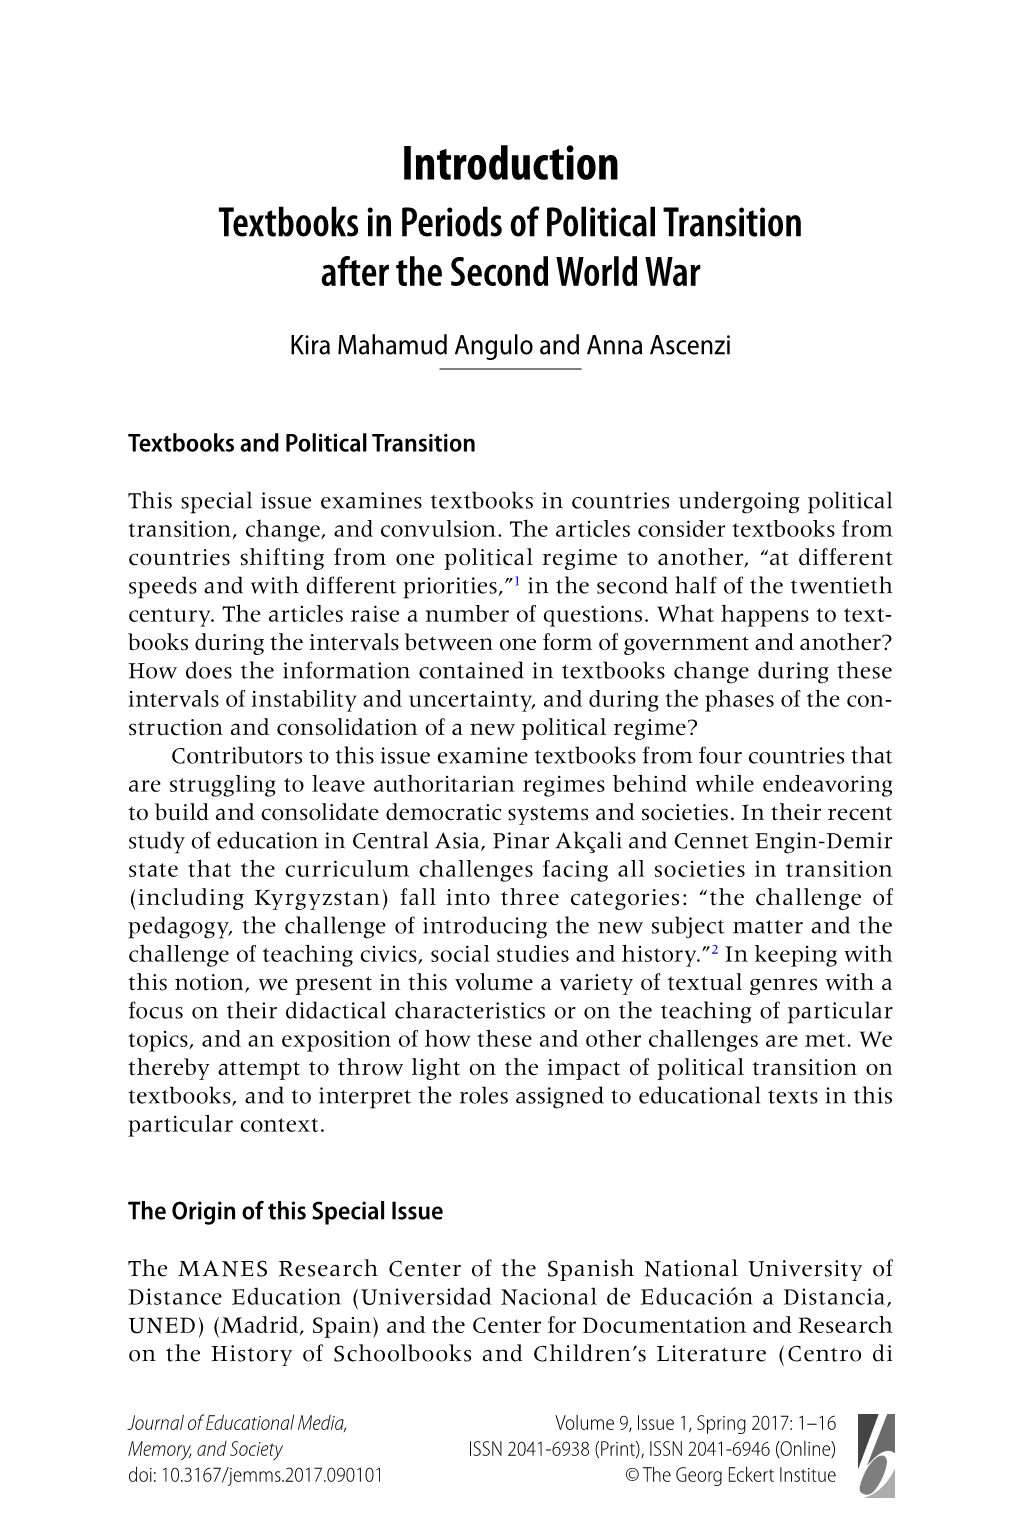 Textbooks in Periods of Political Transition After the Second World War